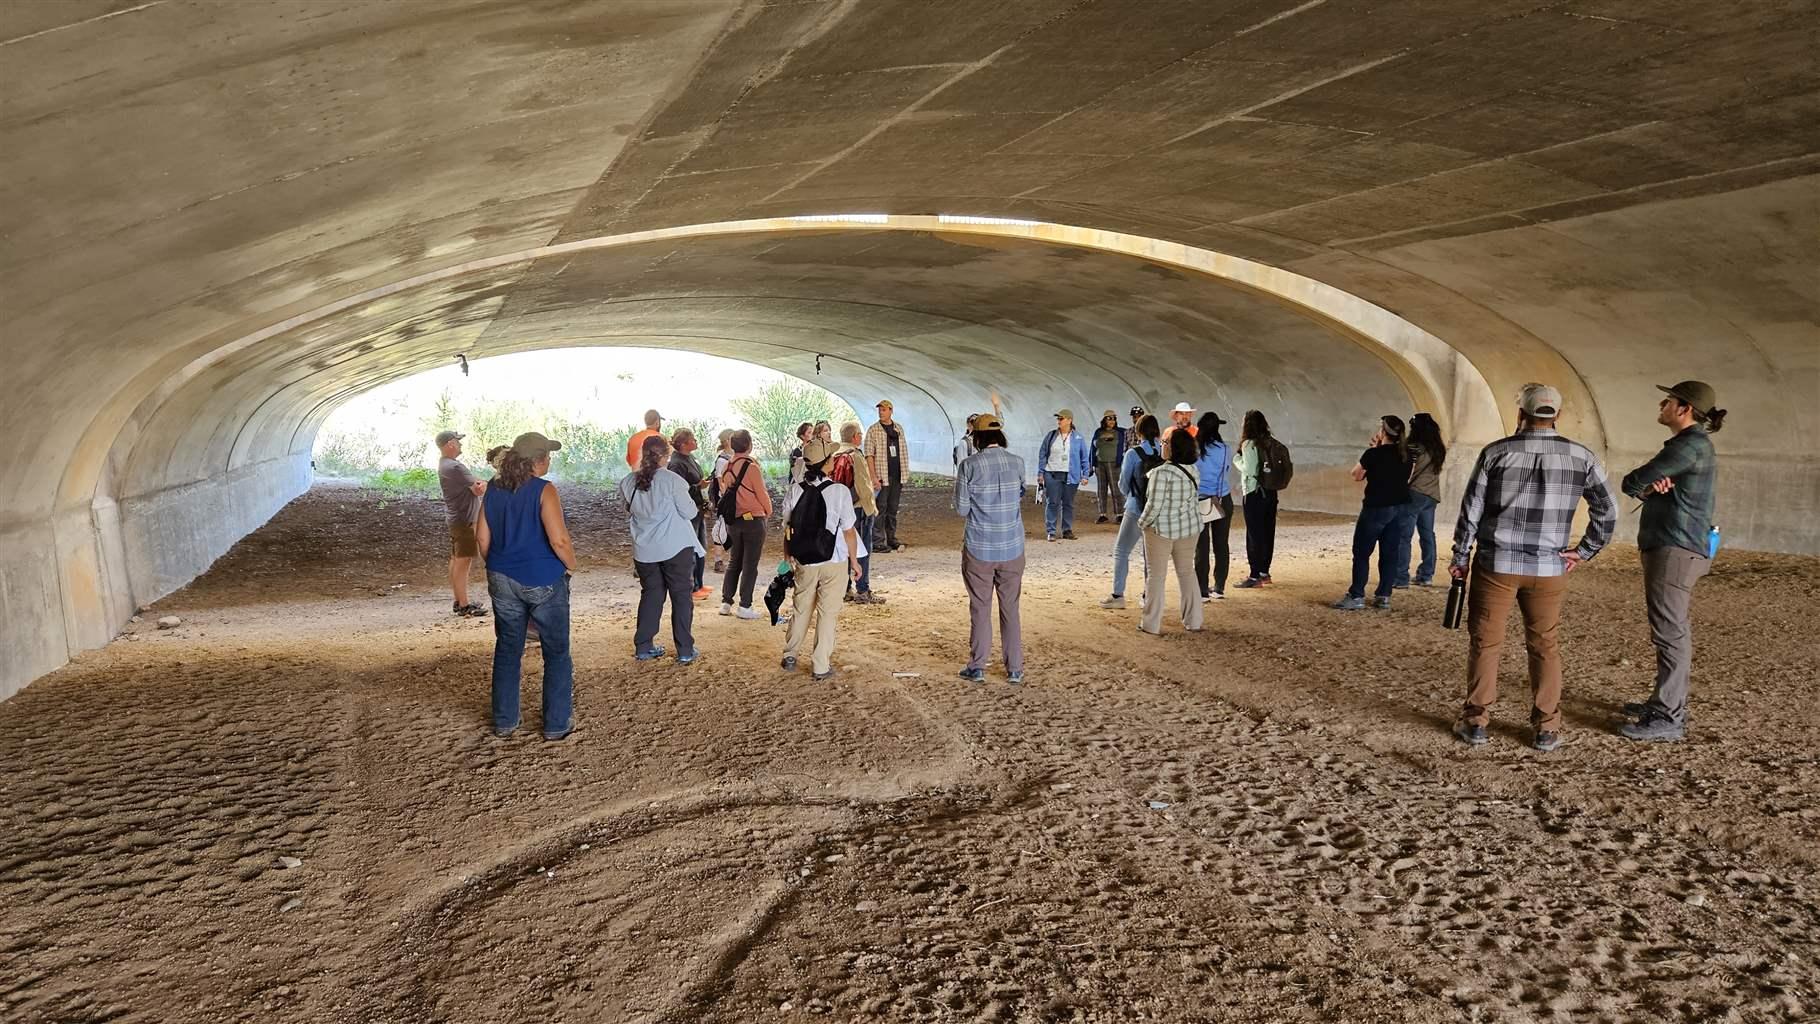 More than two dozen people in comfortable clothing stand on packed dirt below the arched concrete ceiling of a tunnel under State Route 77 north of Tucson.